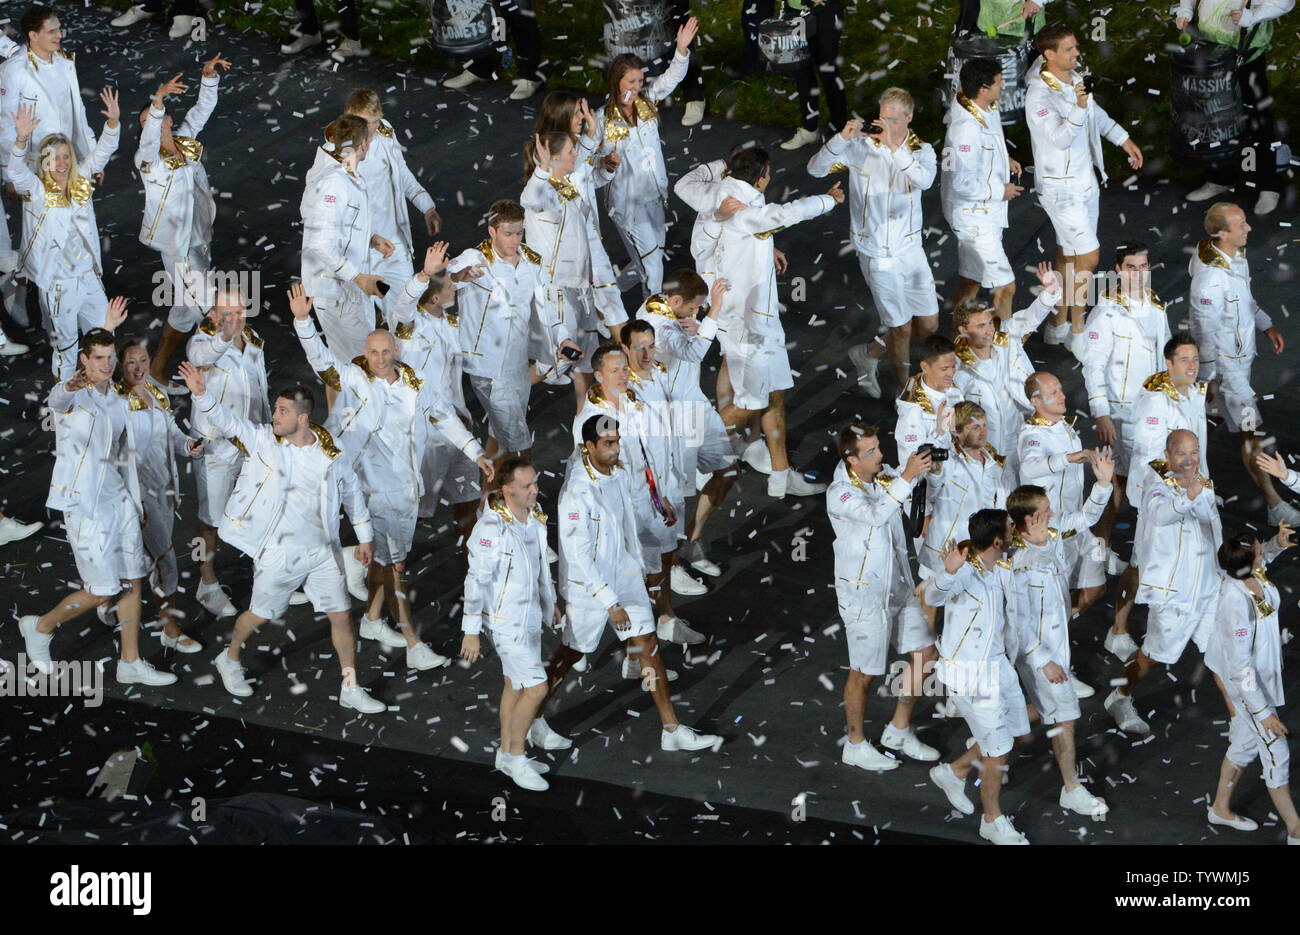 Team Great Britain enters in the Parade of Nations during the Opening Ceremony of the London 2012 Summer Olympics on July 27, 2012 in Stafford, London. UPI/Pat Benic Stock Photo